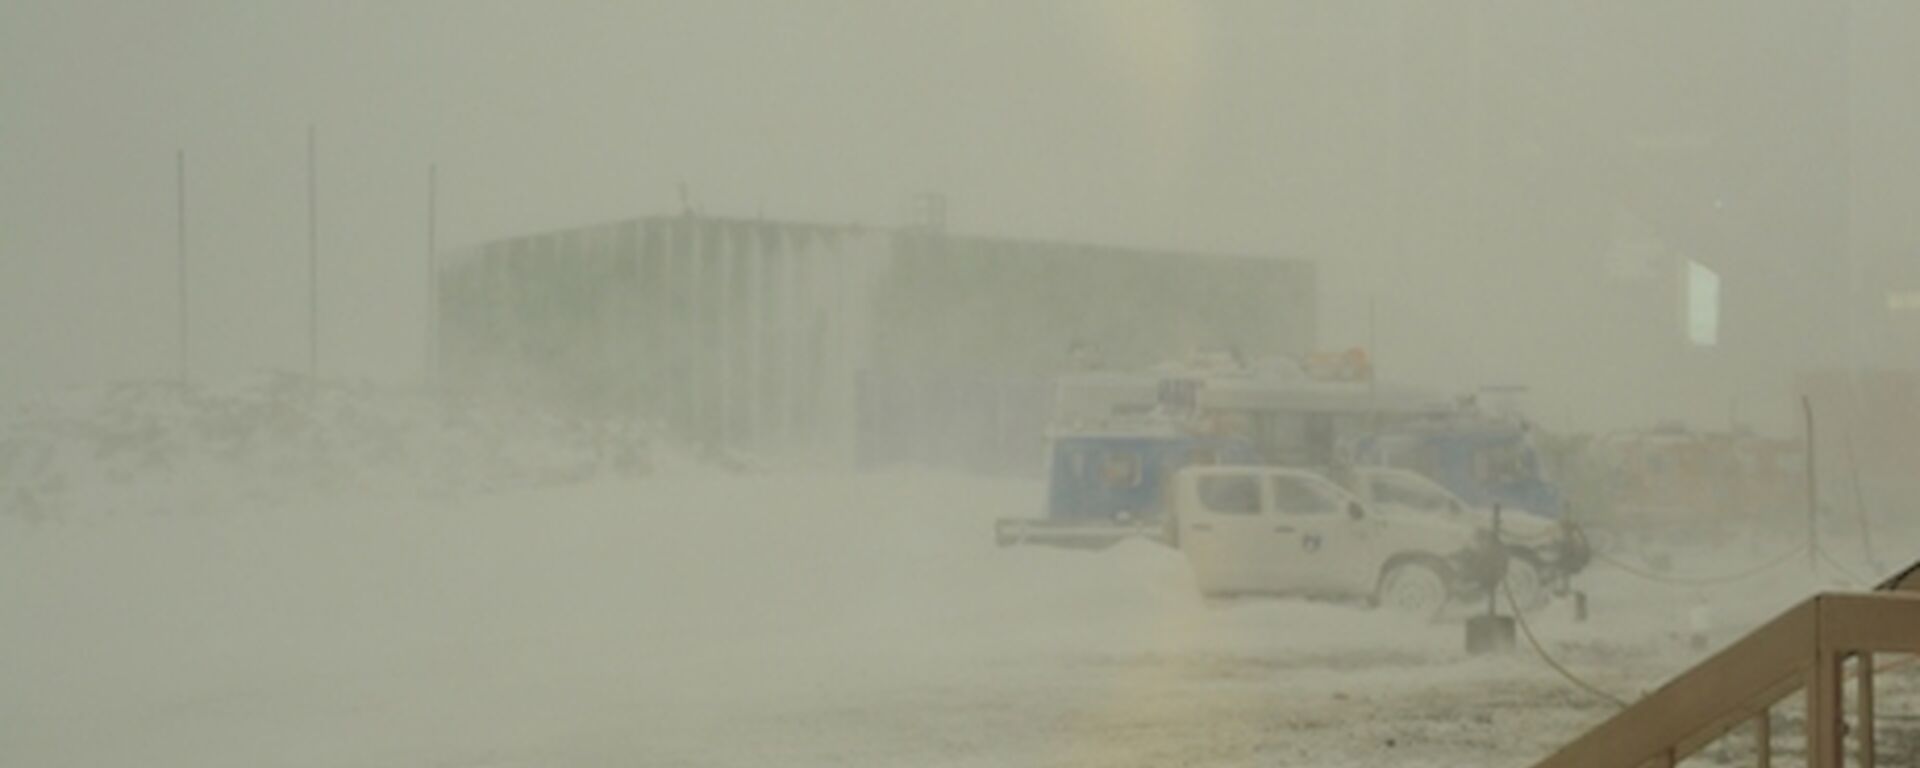 Blowing snow at Casey reduces visibility of buildings